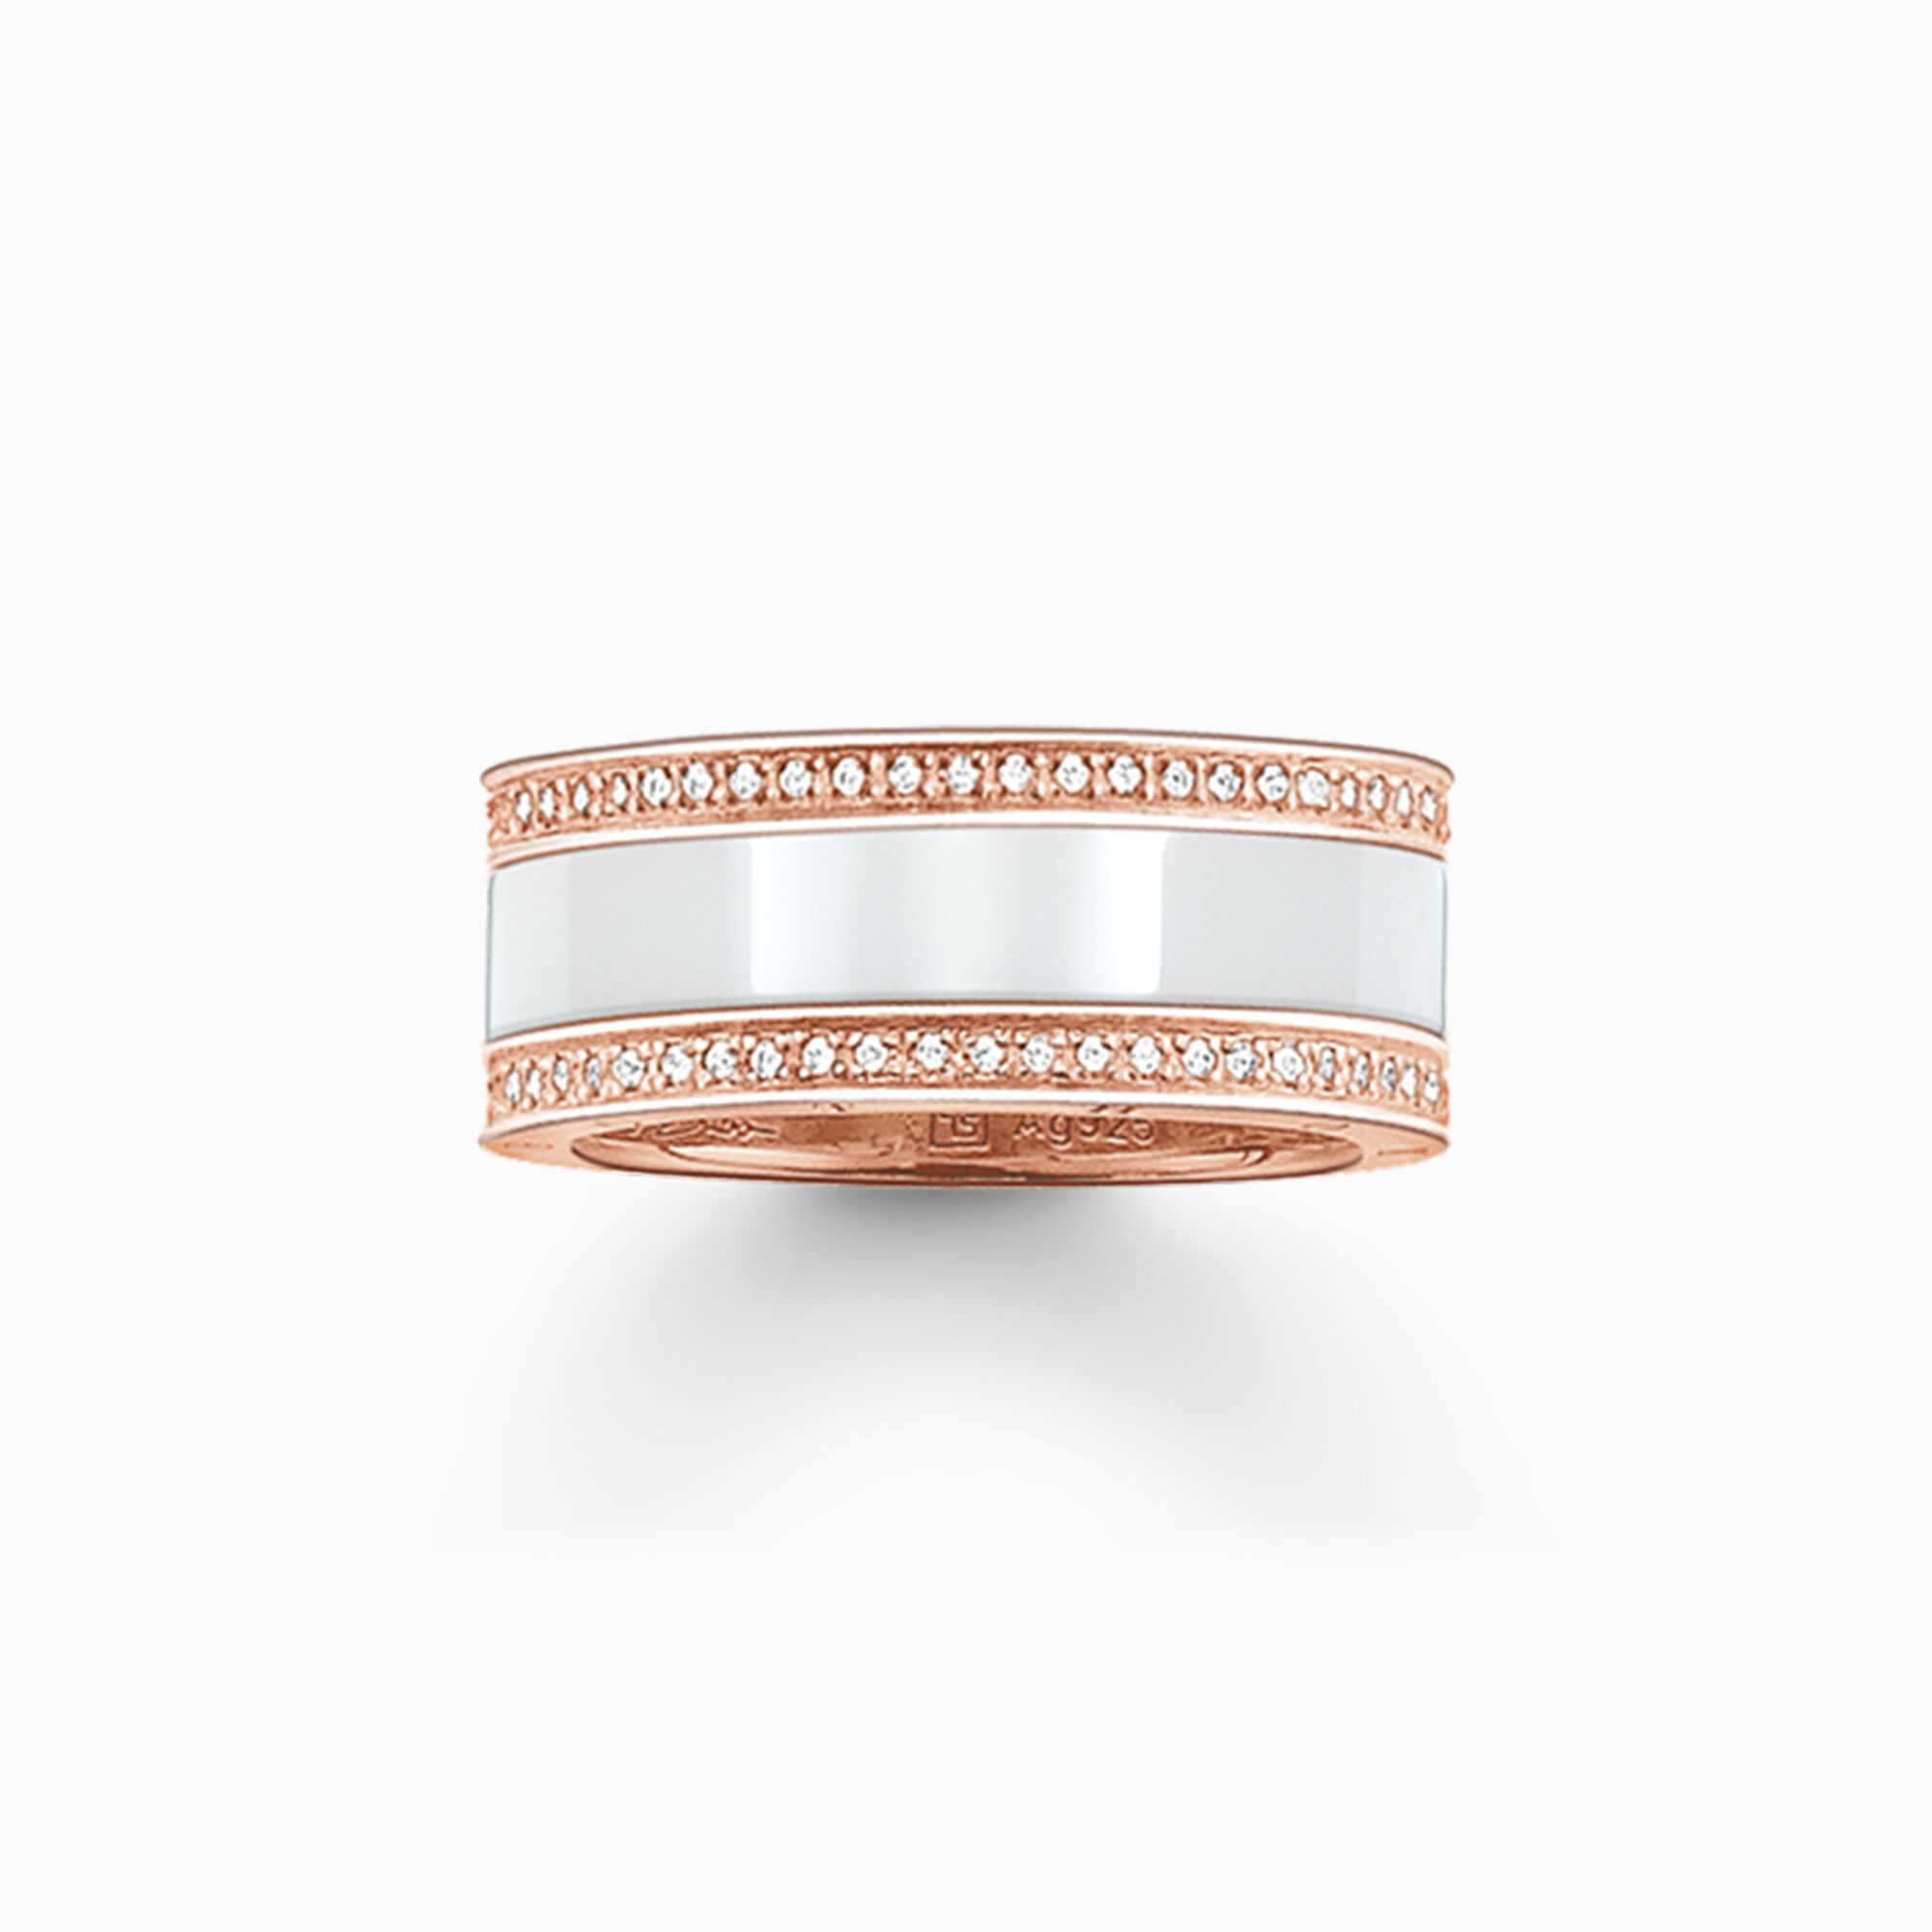 Band ring white Ceramic pav&eacute; from the  collection in the THOMAS SABO online store